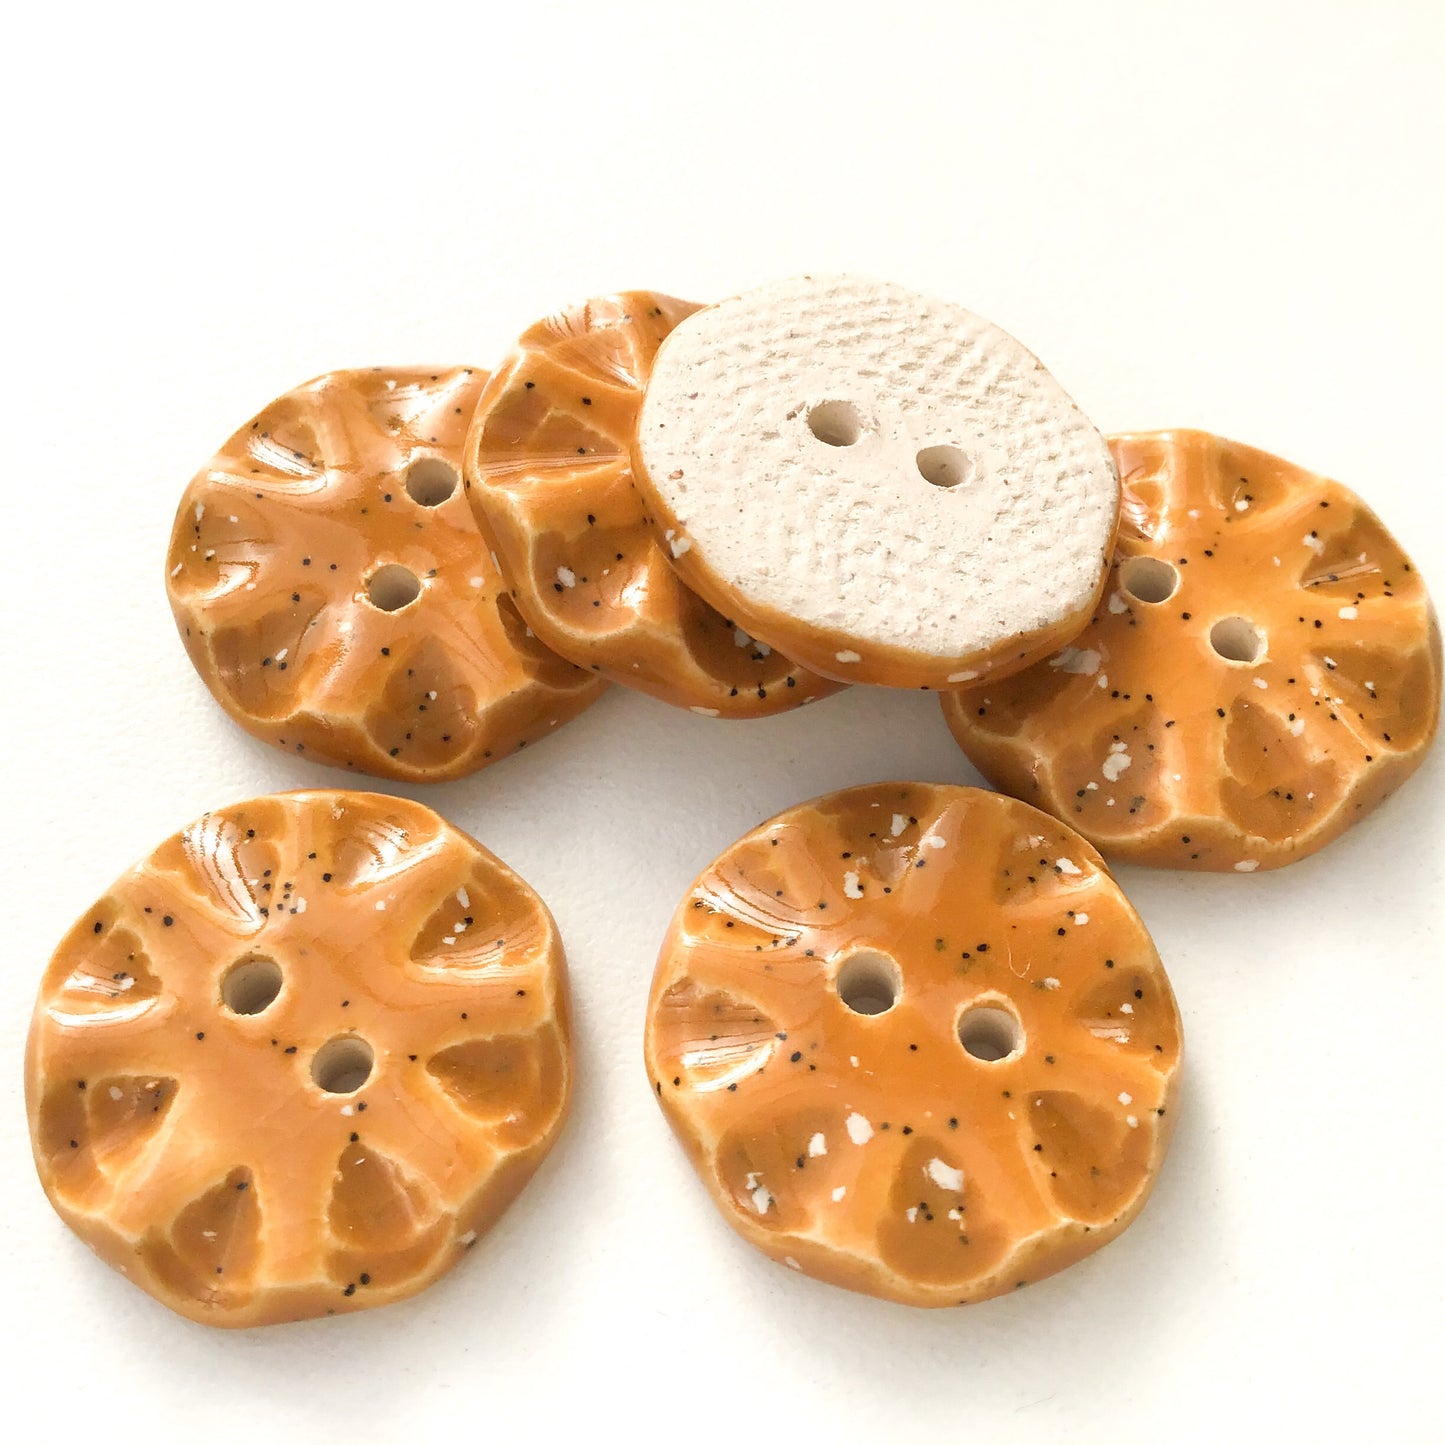 Speckled Brown Ceramic Buttons - Orange-Brown Clay Buttons - 3/4" - 6 Pack